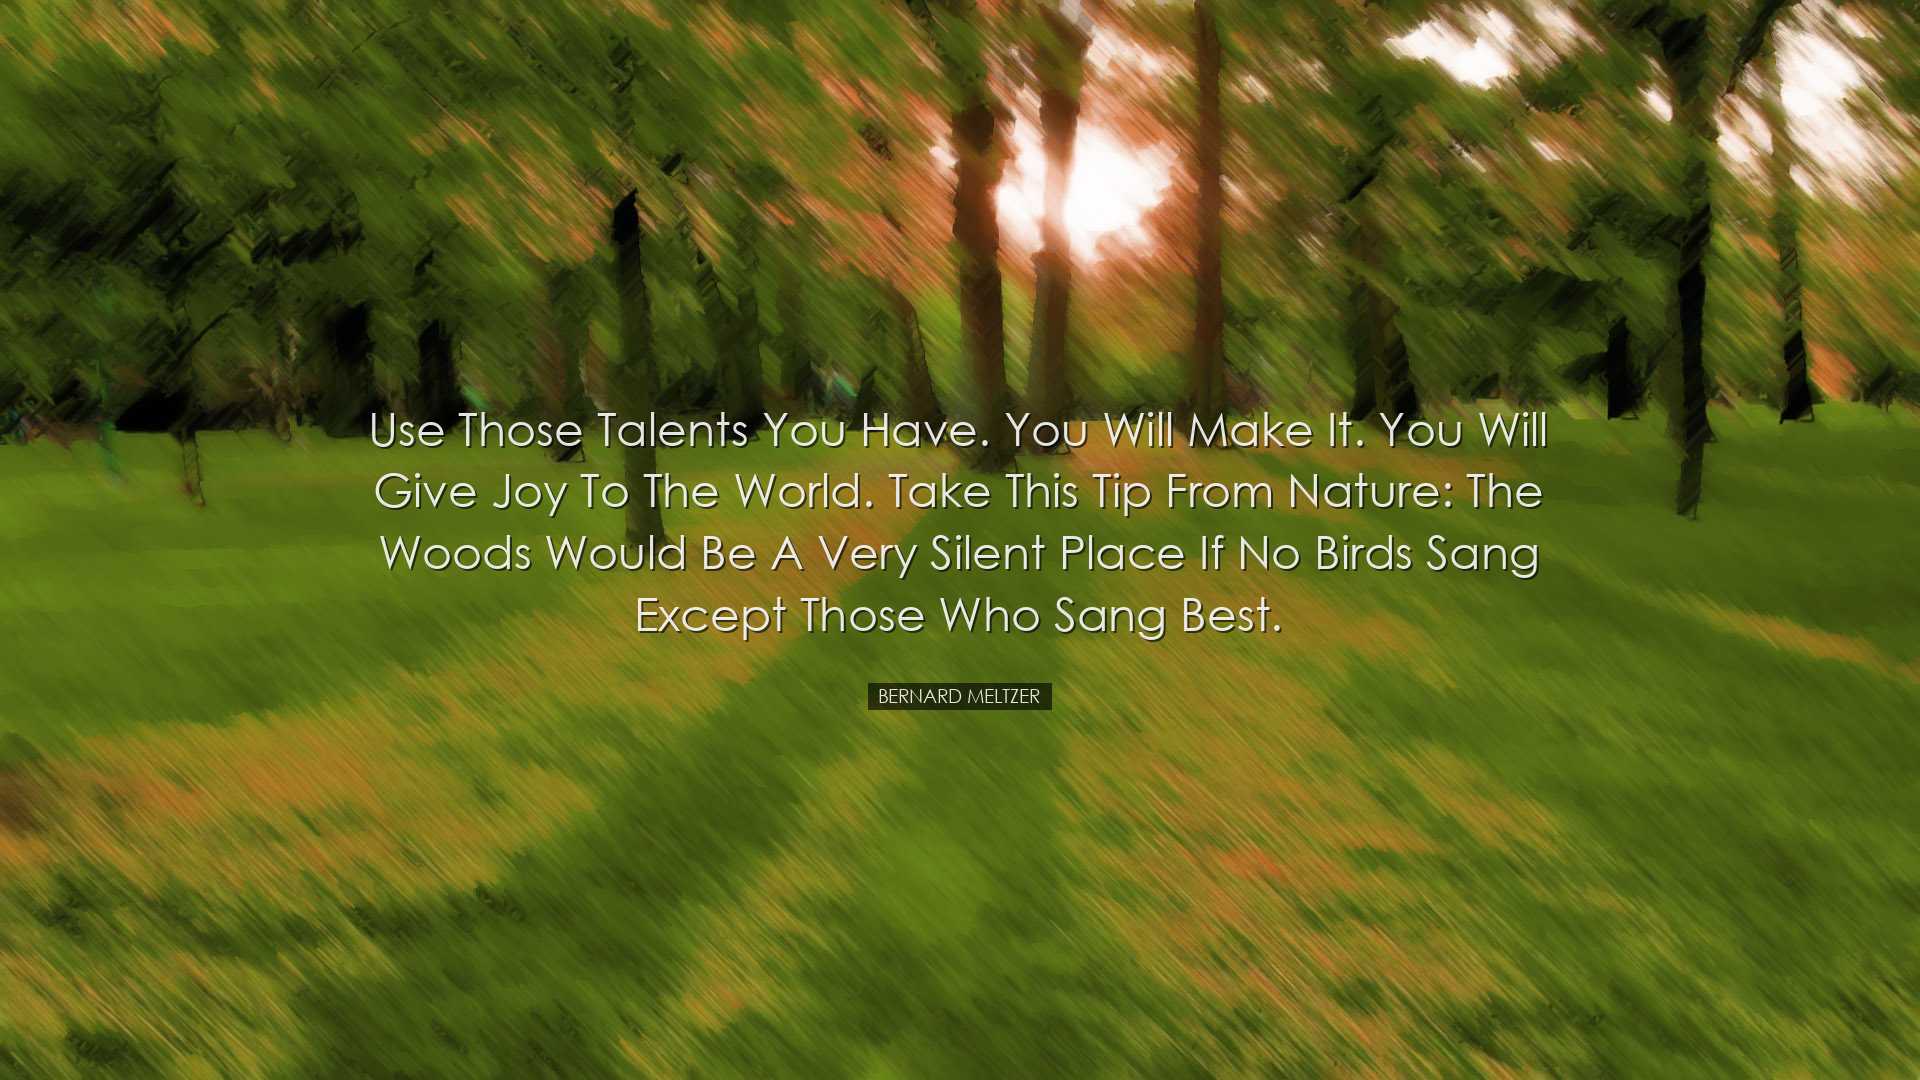 Use those talents you have. You will make it. You will give joy to